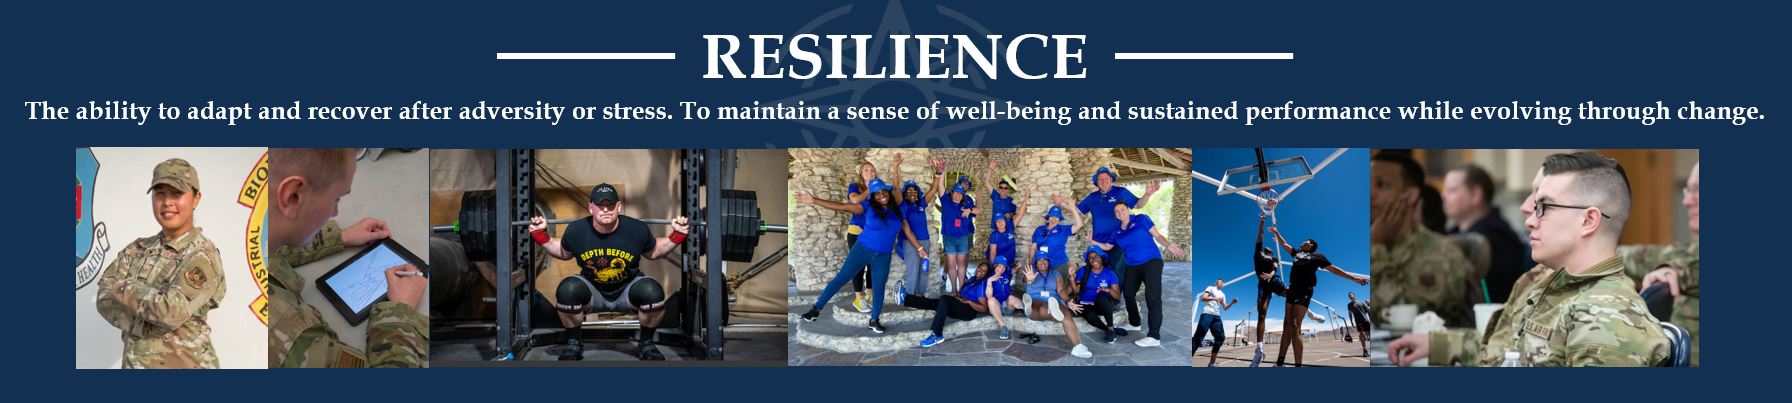 Resilience web page header graphic.  Resilience is our ability to adapt and recoveer after adversity or stress.